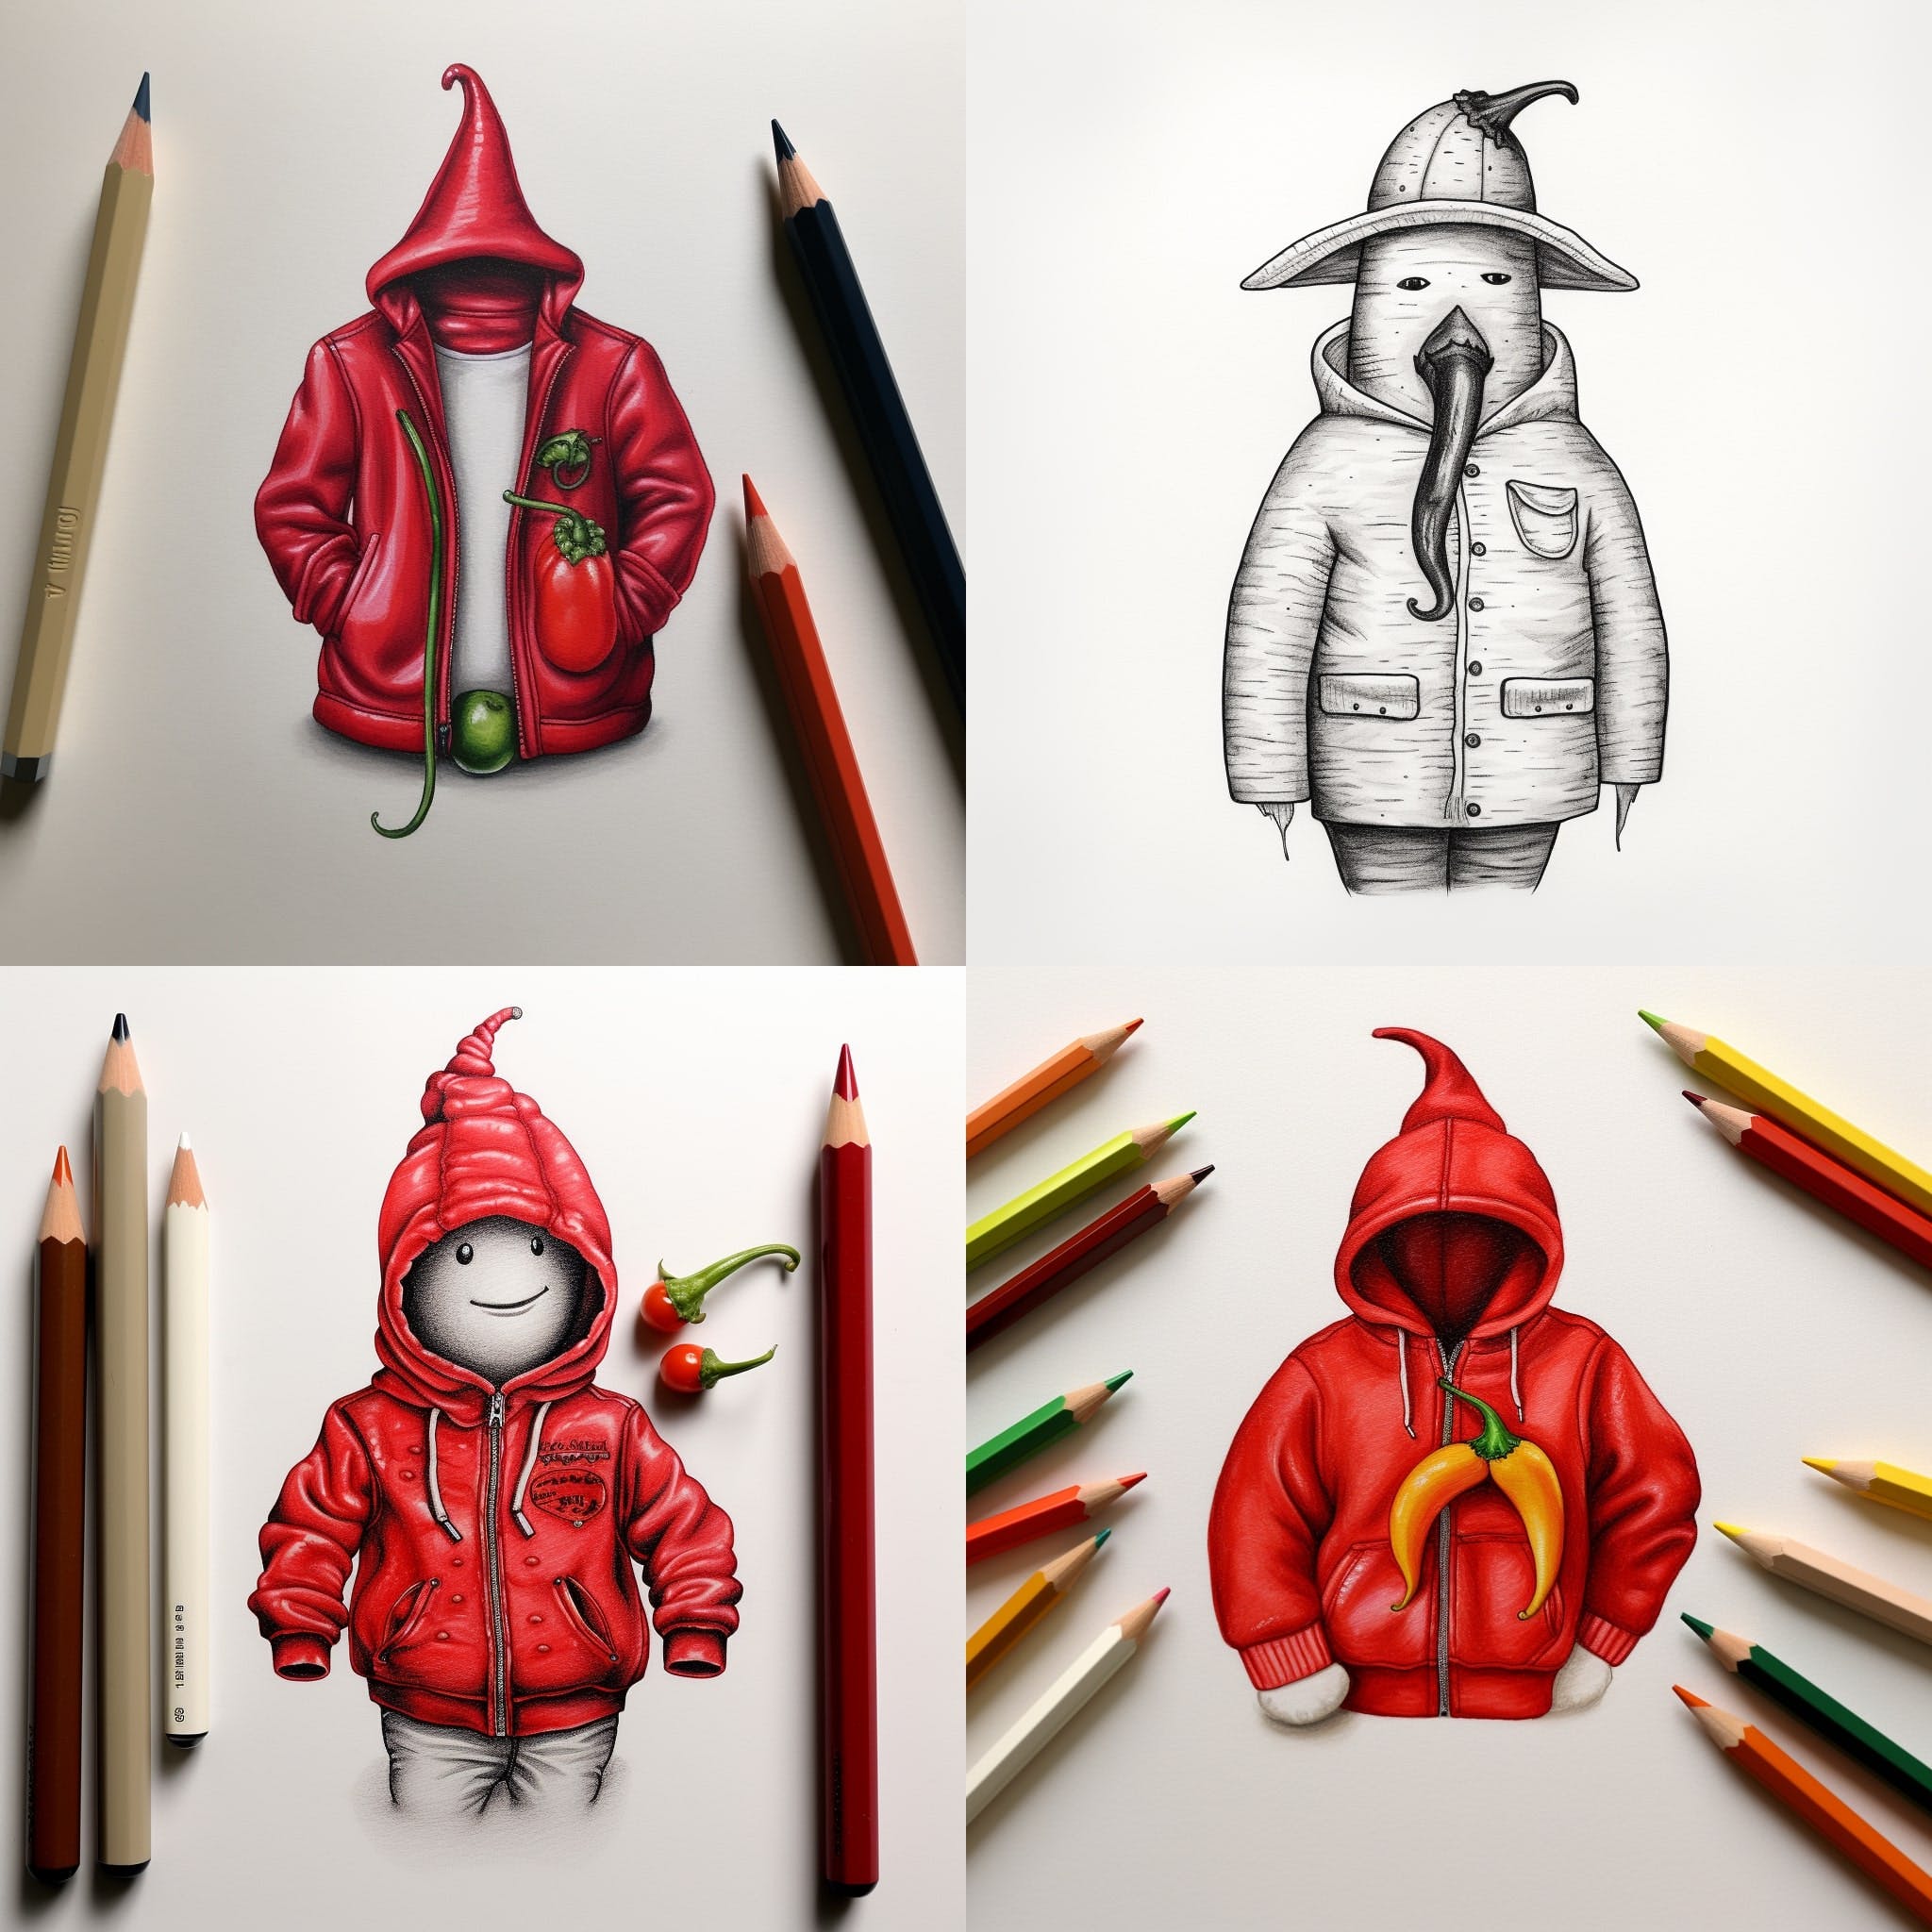 Midjourney prompt used: Small chilli pepper wearing a jacket, pencil drawing style